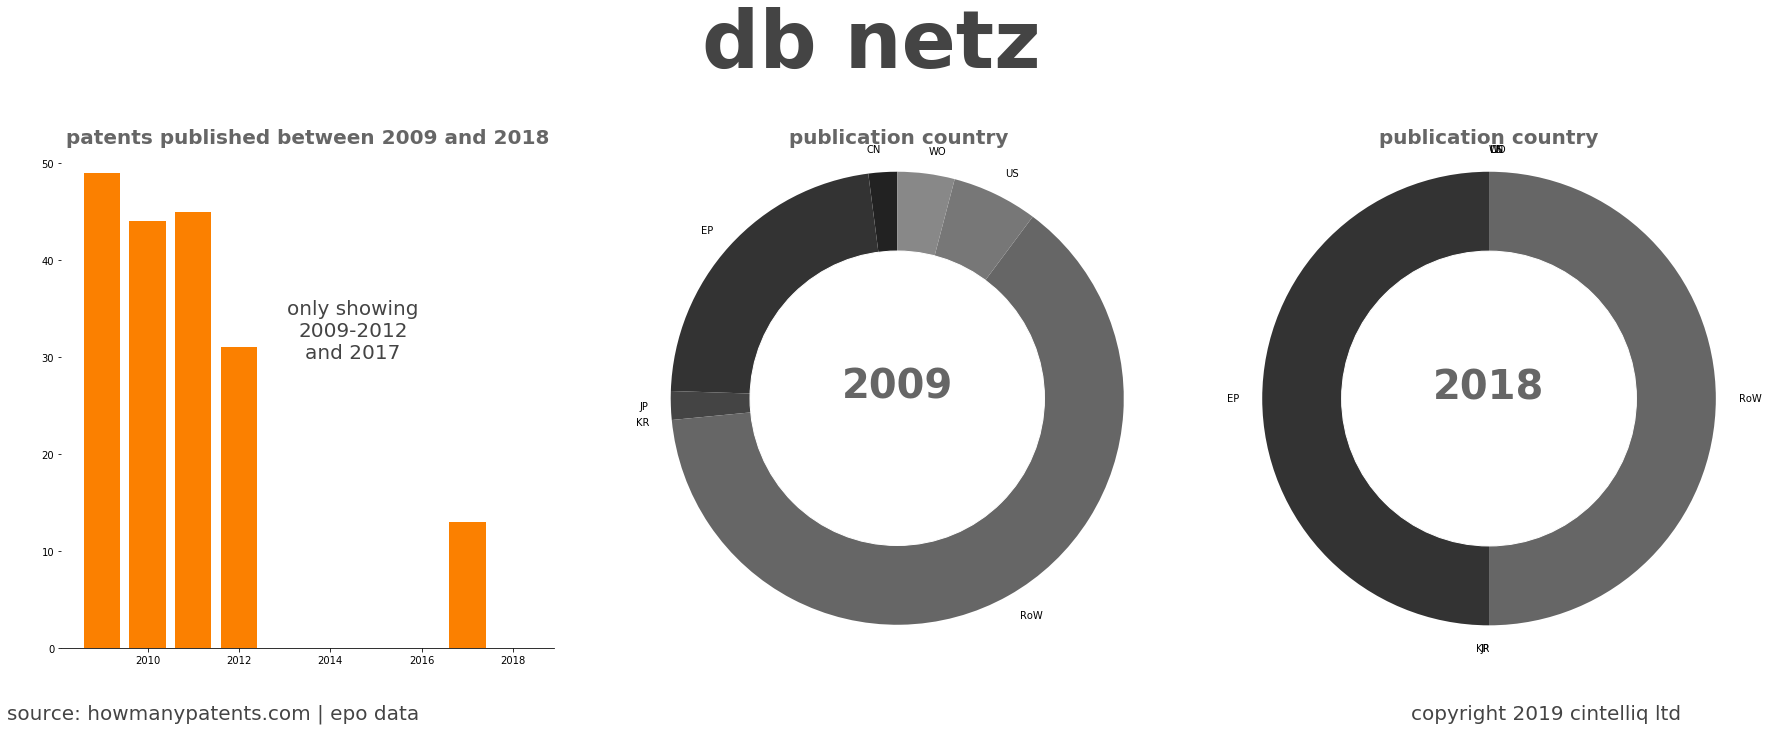 summary of patents for Db Netz